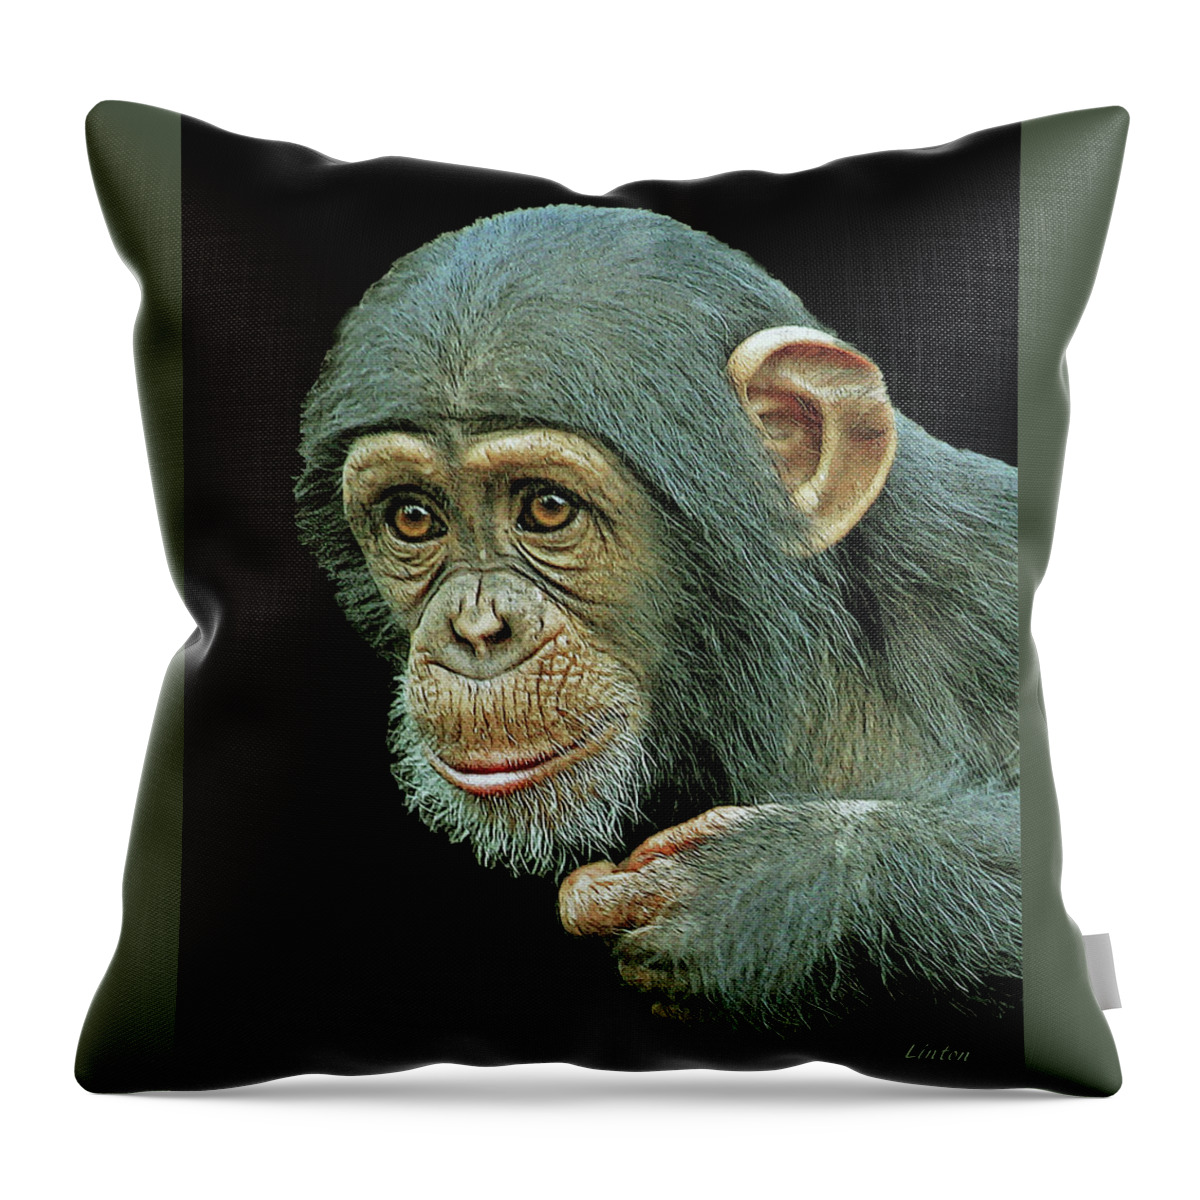 Chimpanzee Throw Pillow featuring the digital art Young Chimpanzee #1 by Larry Linton